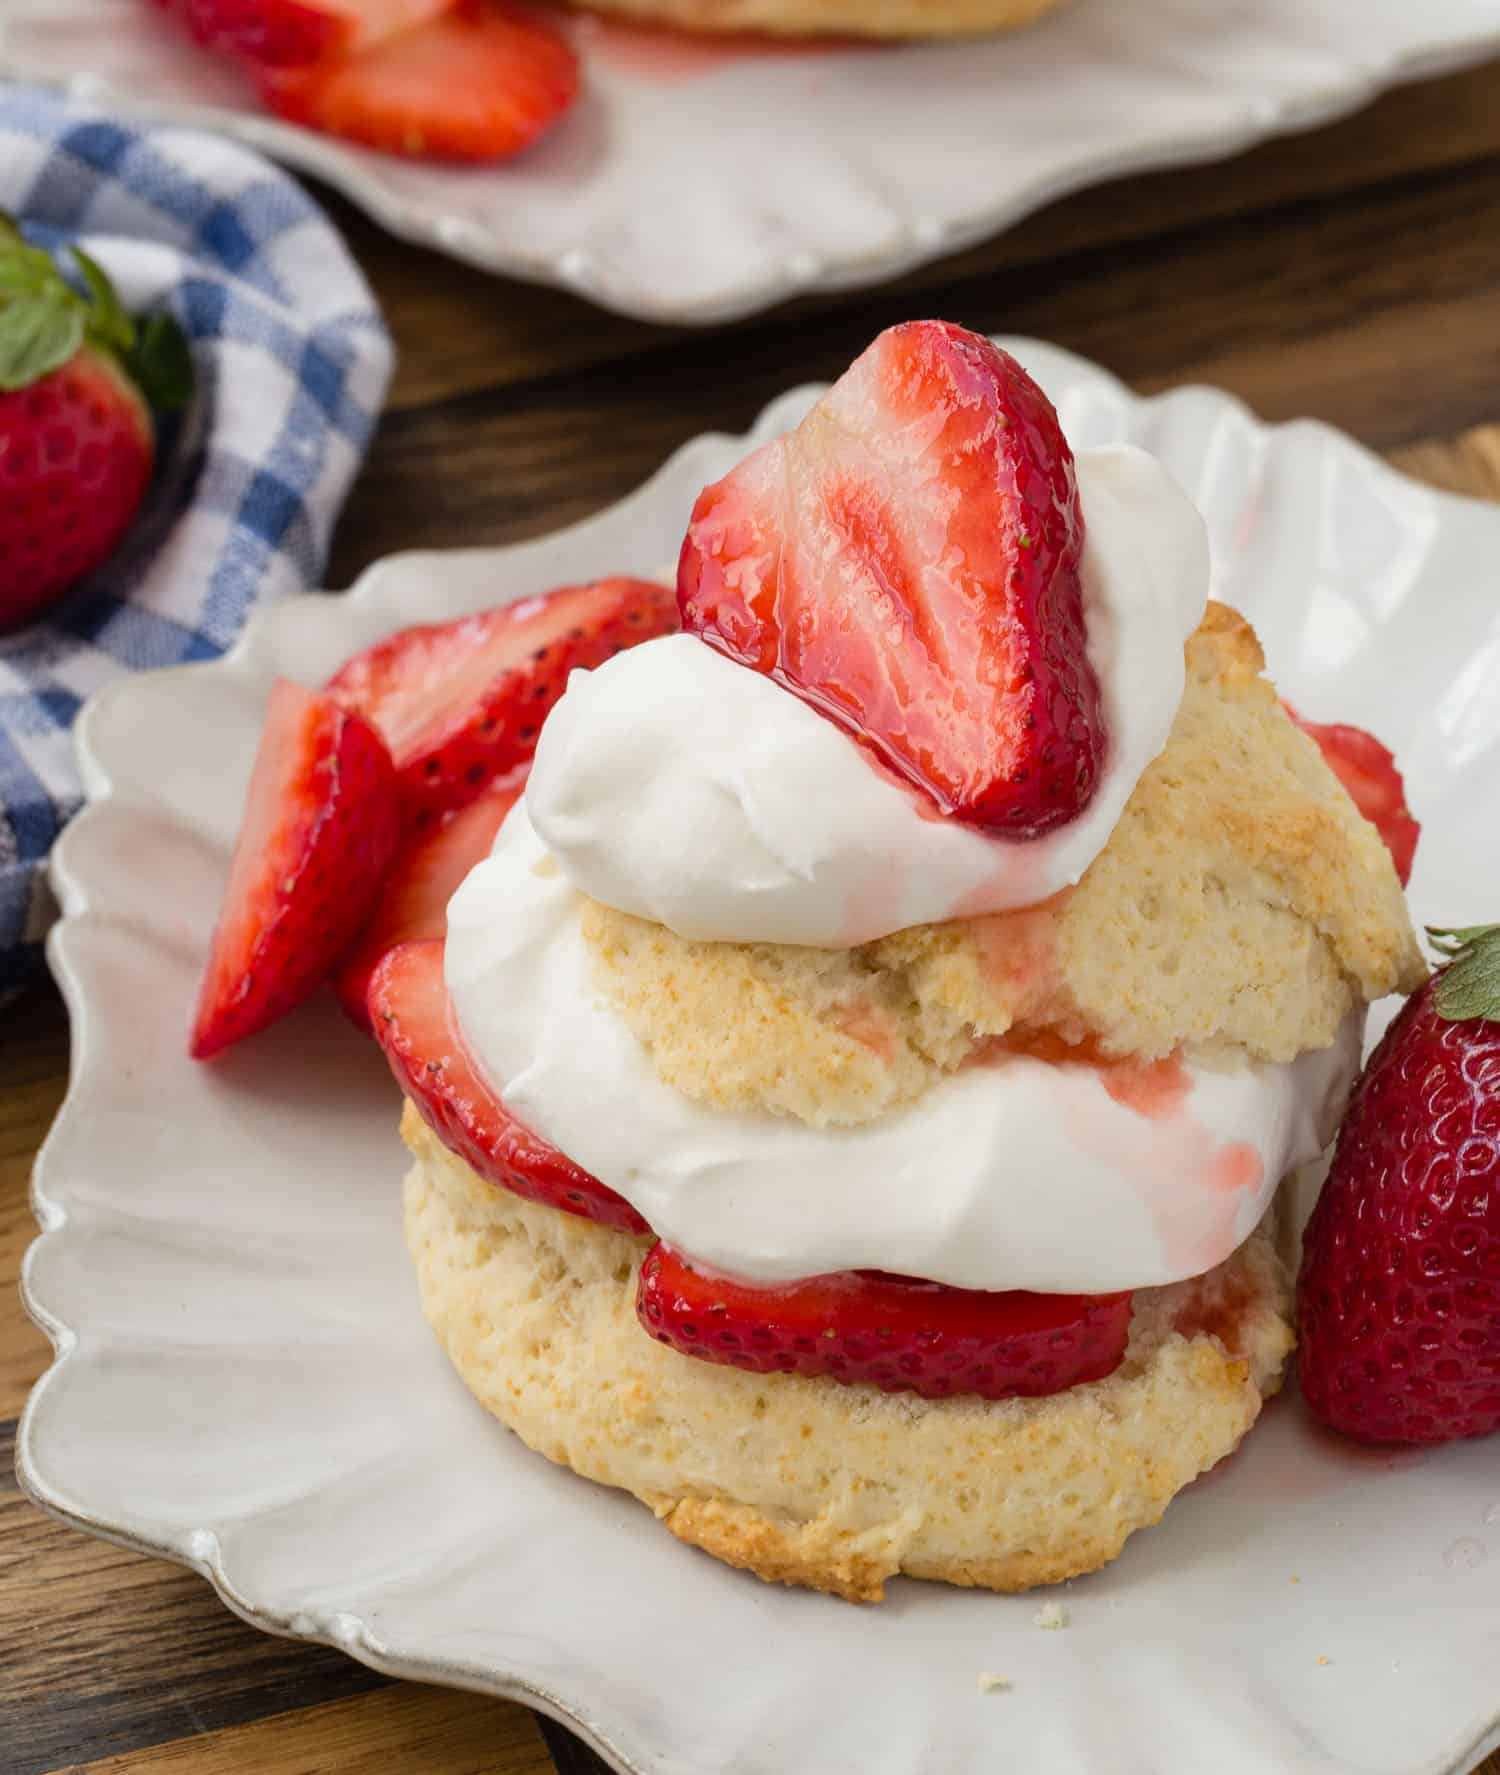 A shortcake split in half and filled with whipped cream and strawberries.